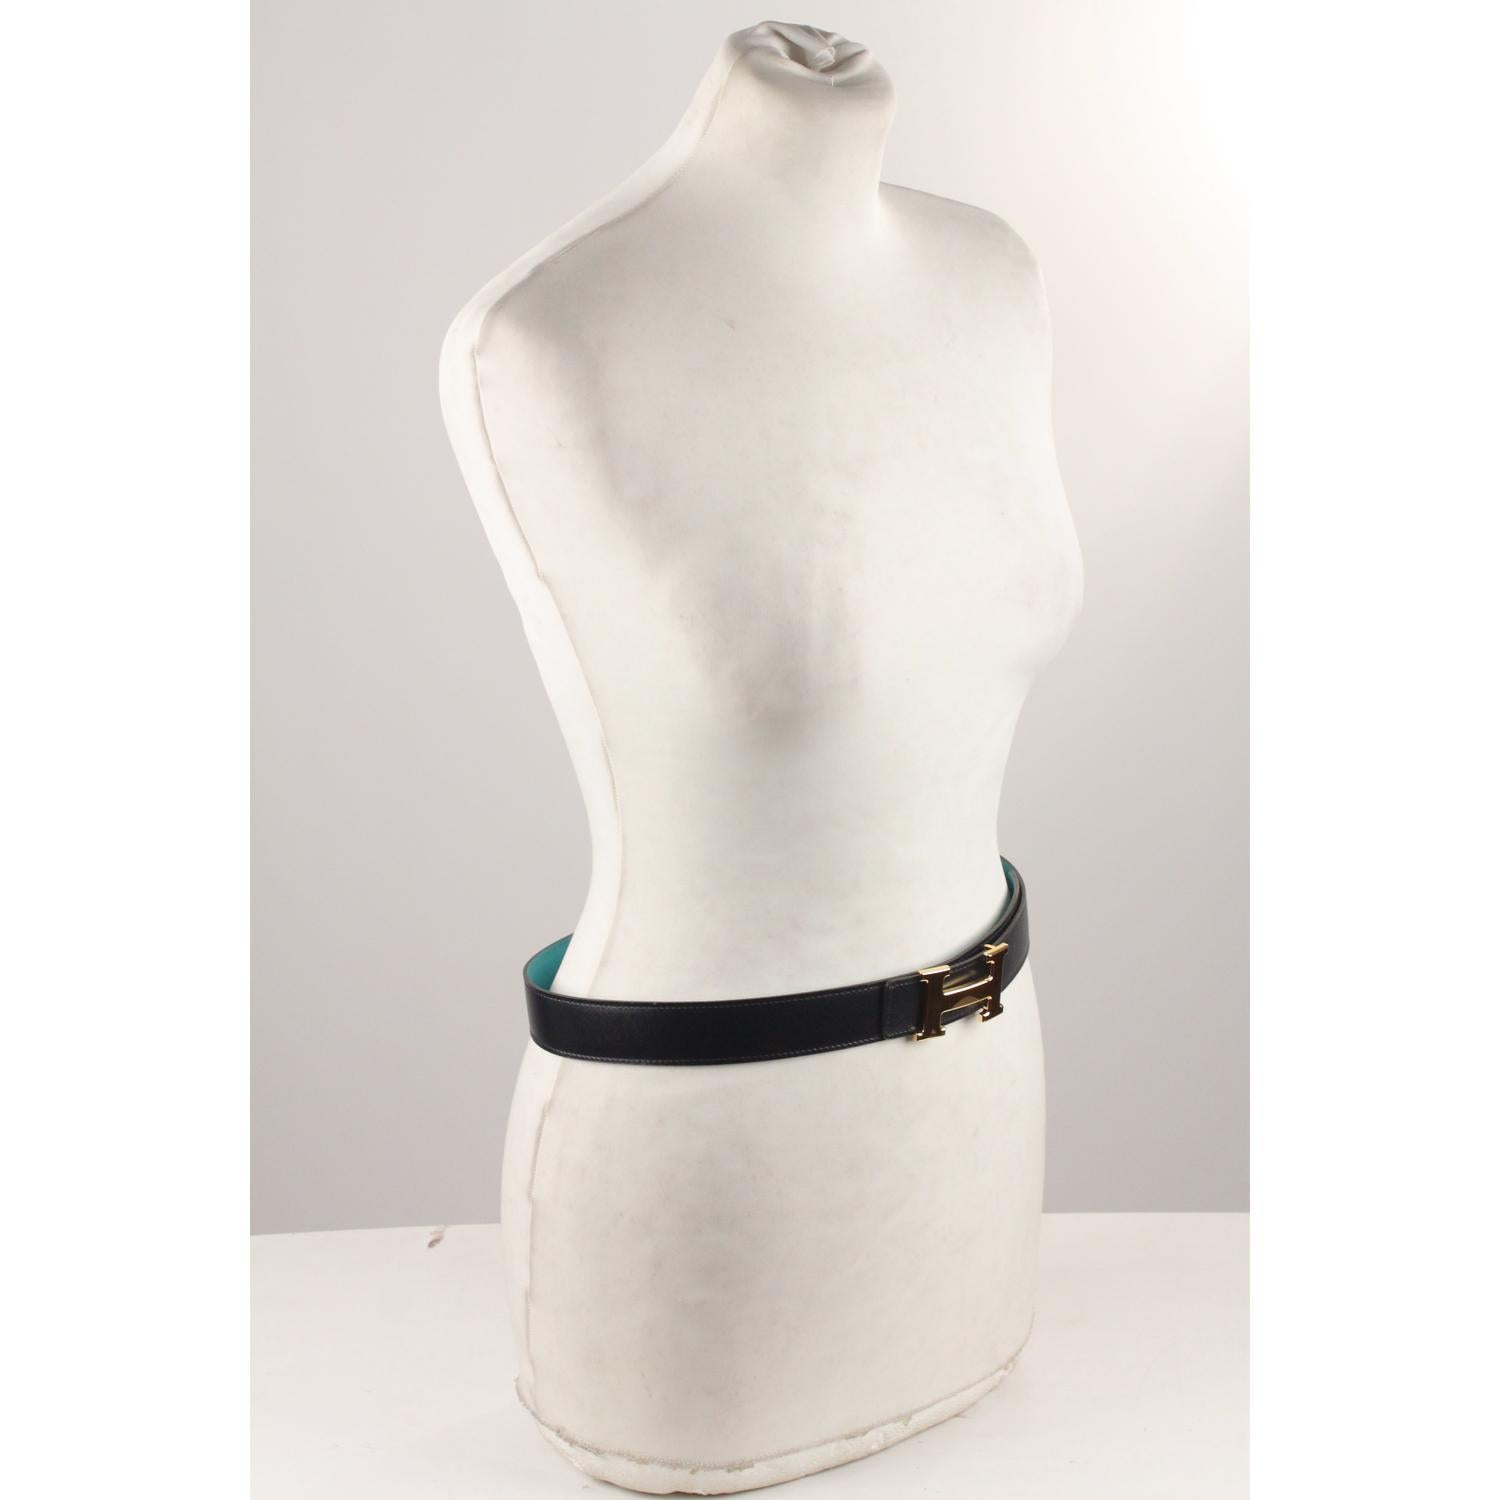 Hermes Teal and Blue Leather Reversible Belt with Gold Metal H-Buckle  4